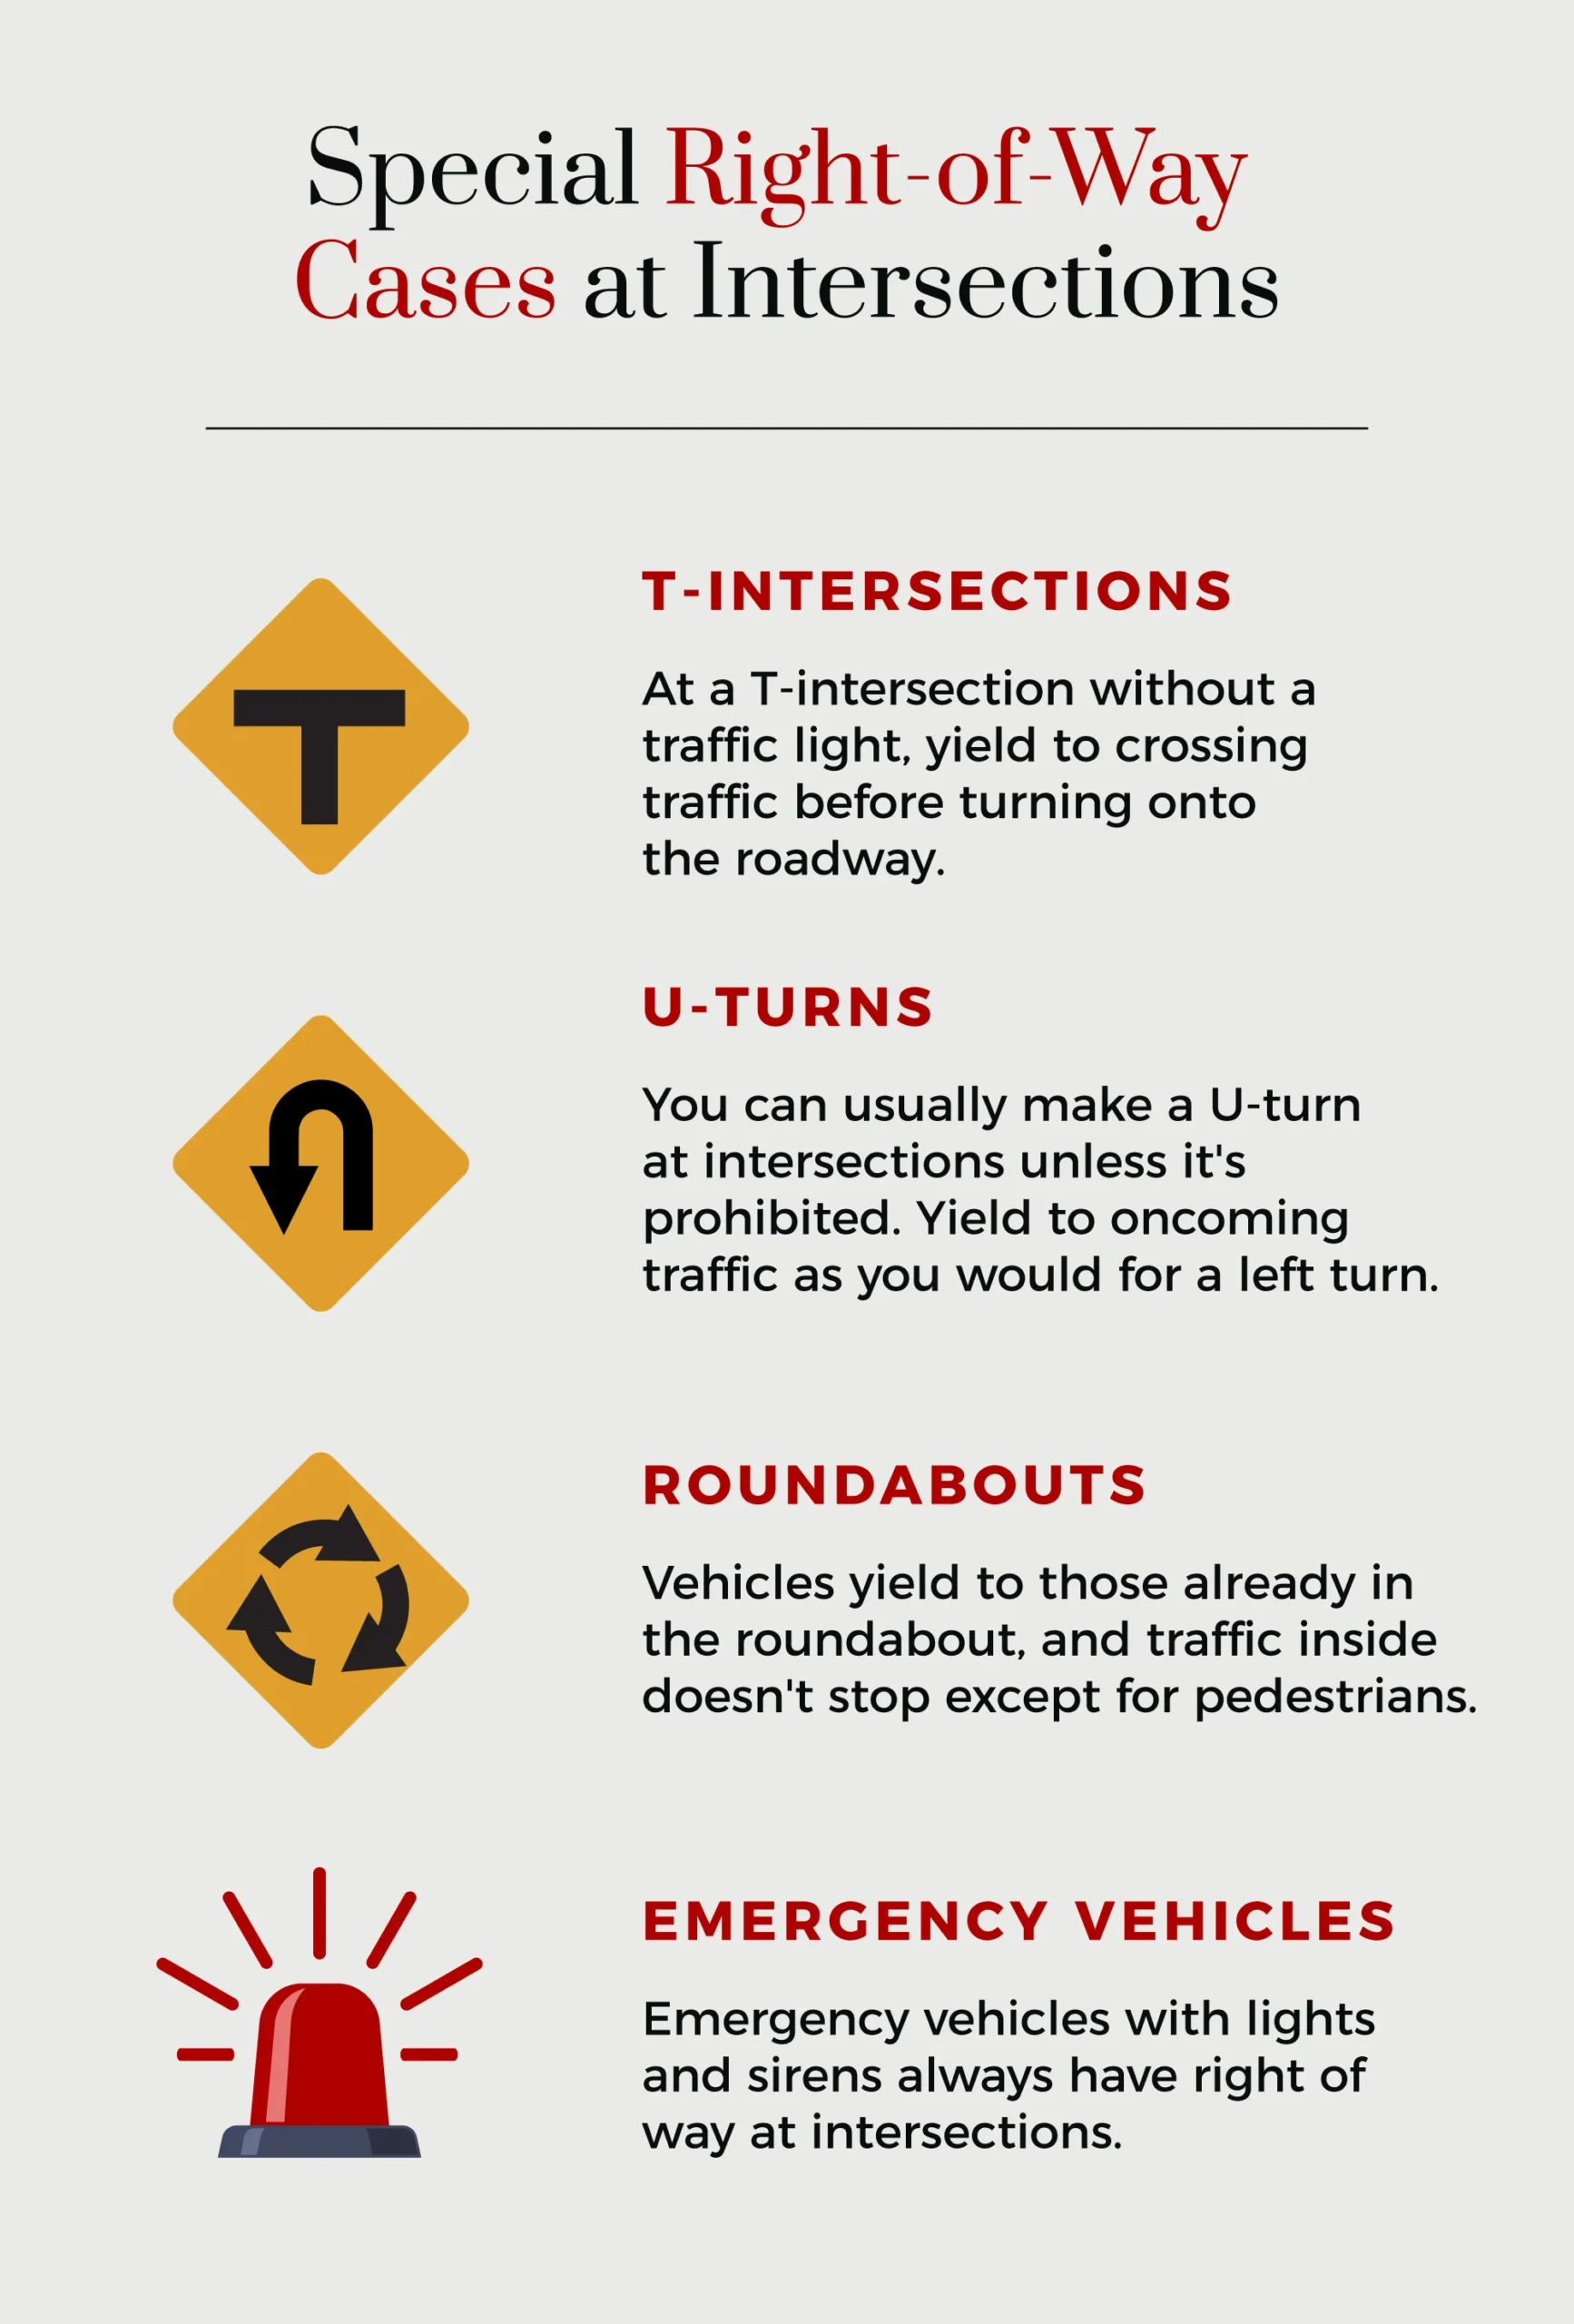 special right-of-way cases at intersections